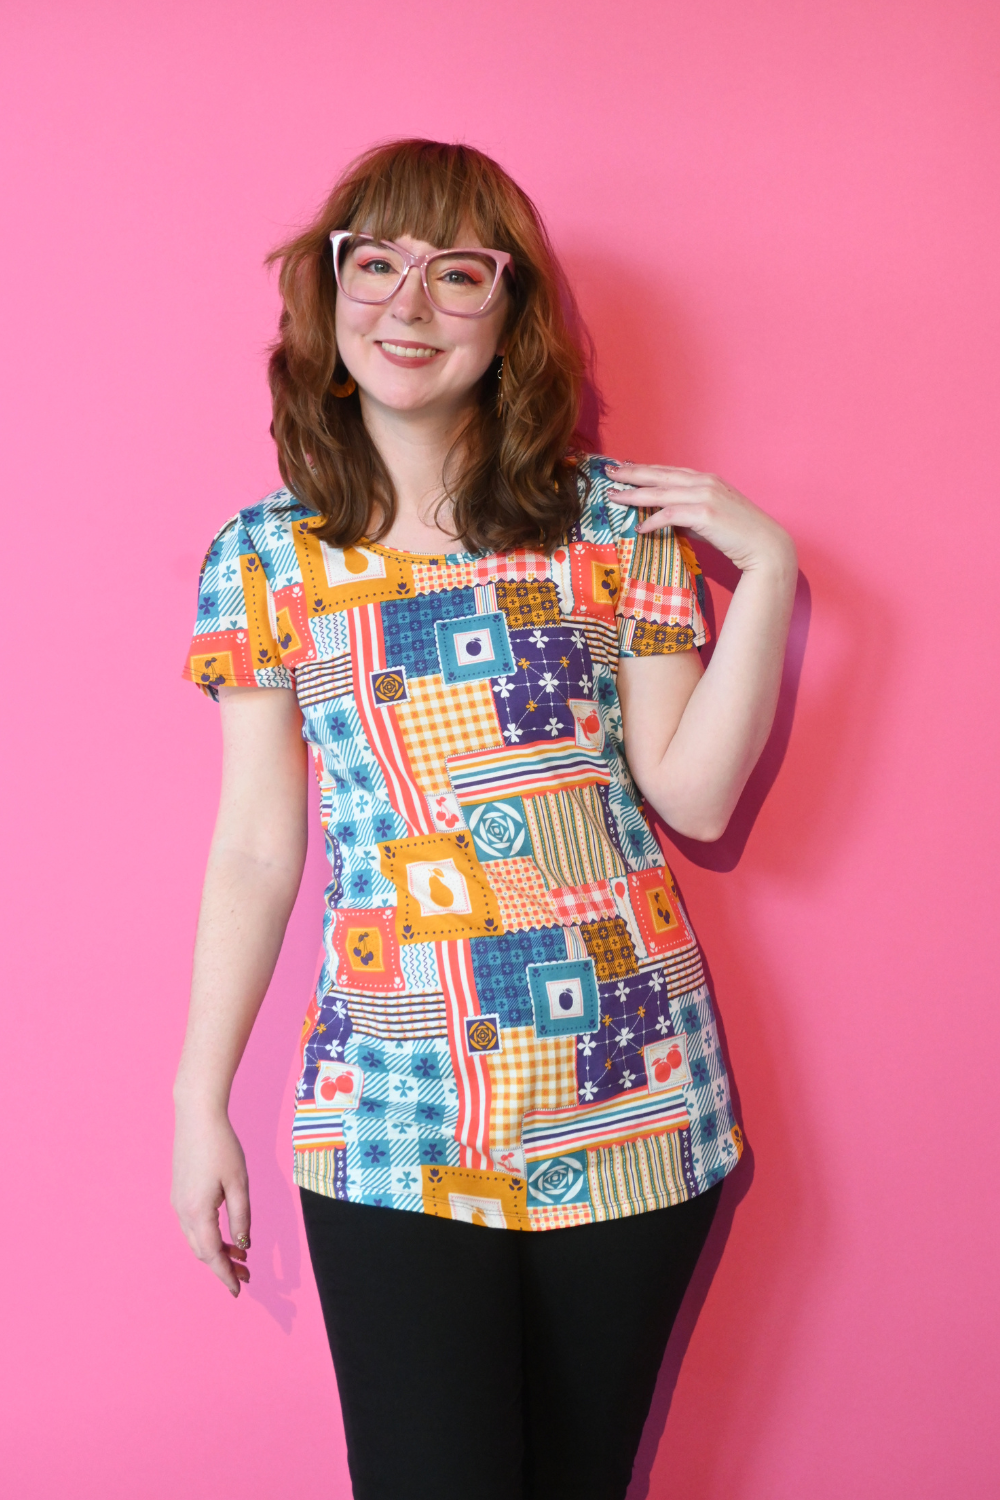 Brown-haired model with glasses in shirt printed with patchwork and fruit print